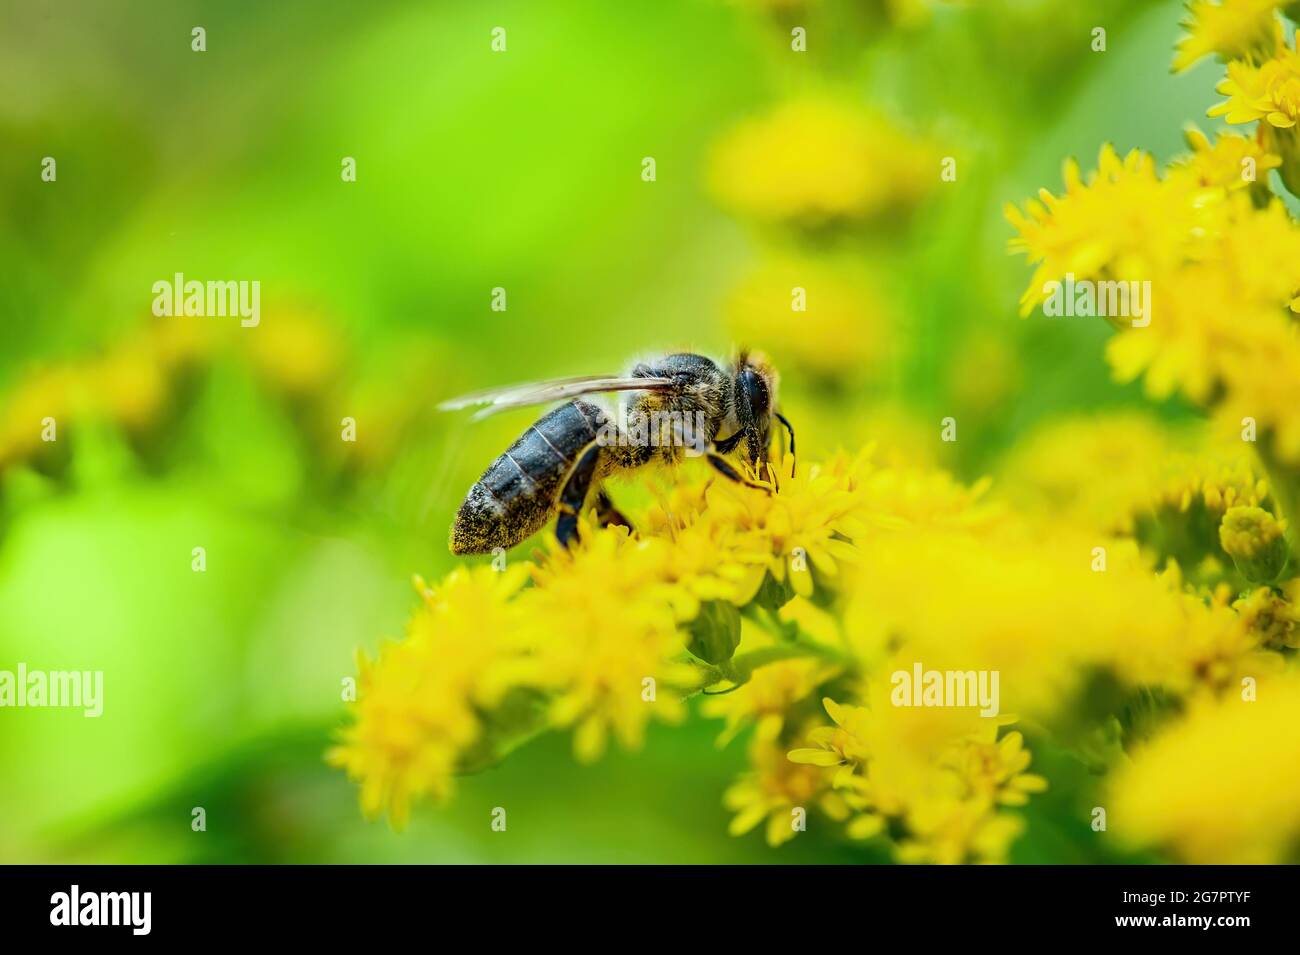 Honey Bee Insect Pollinating Wild Yellow Flowers Stock Photo